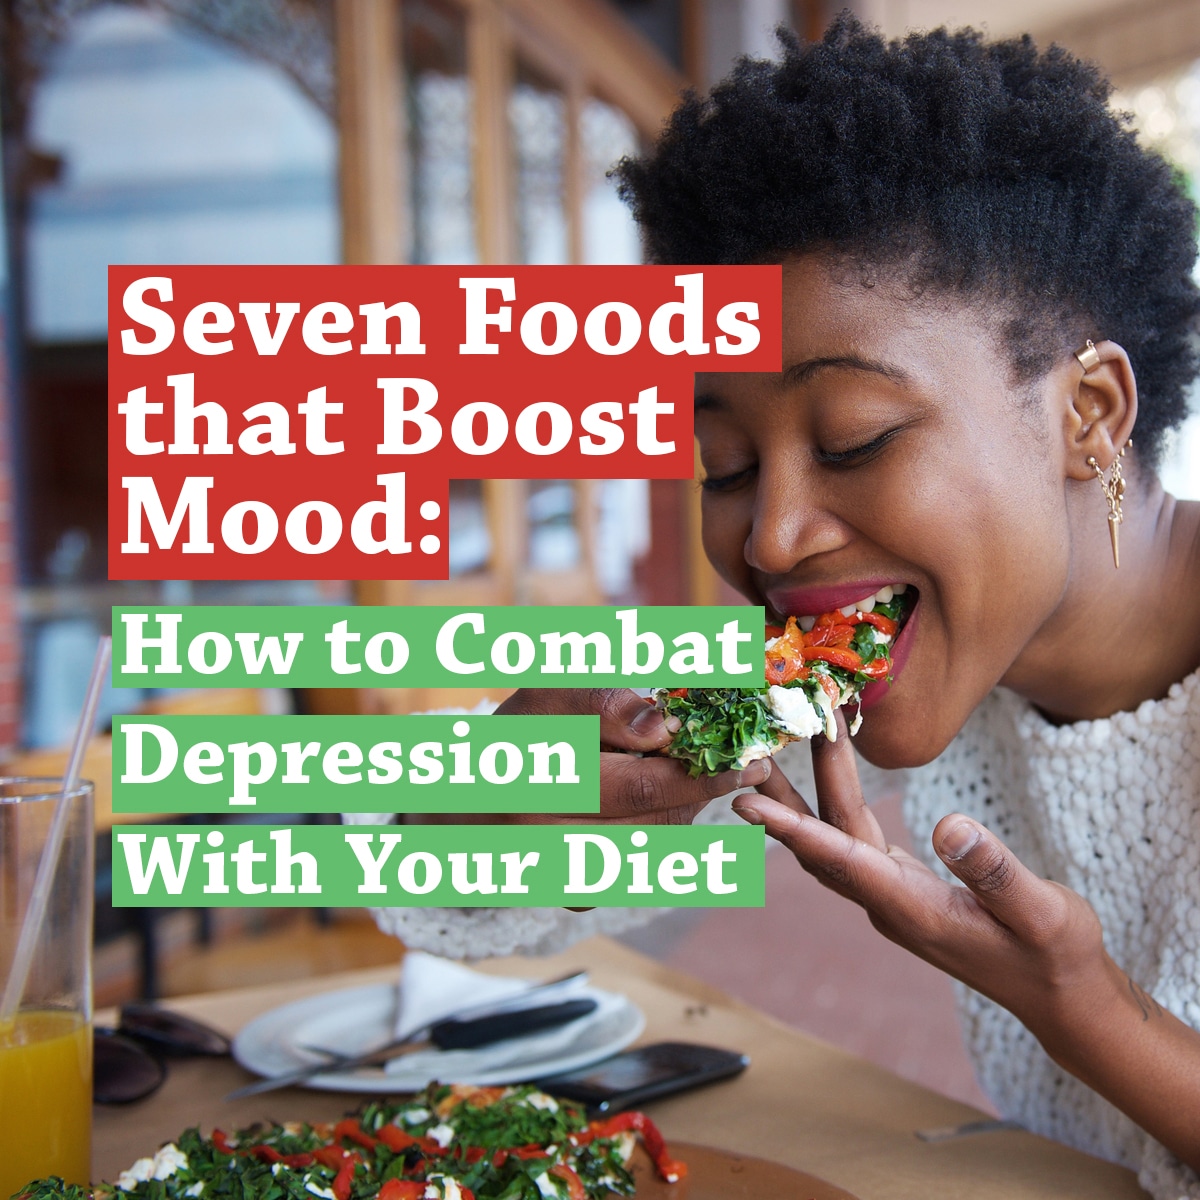 Seven Foods that Boost Mood: How to Combat Depression With Your Diet